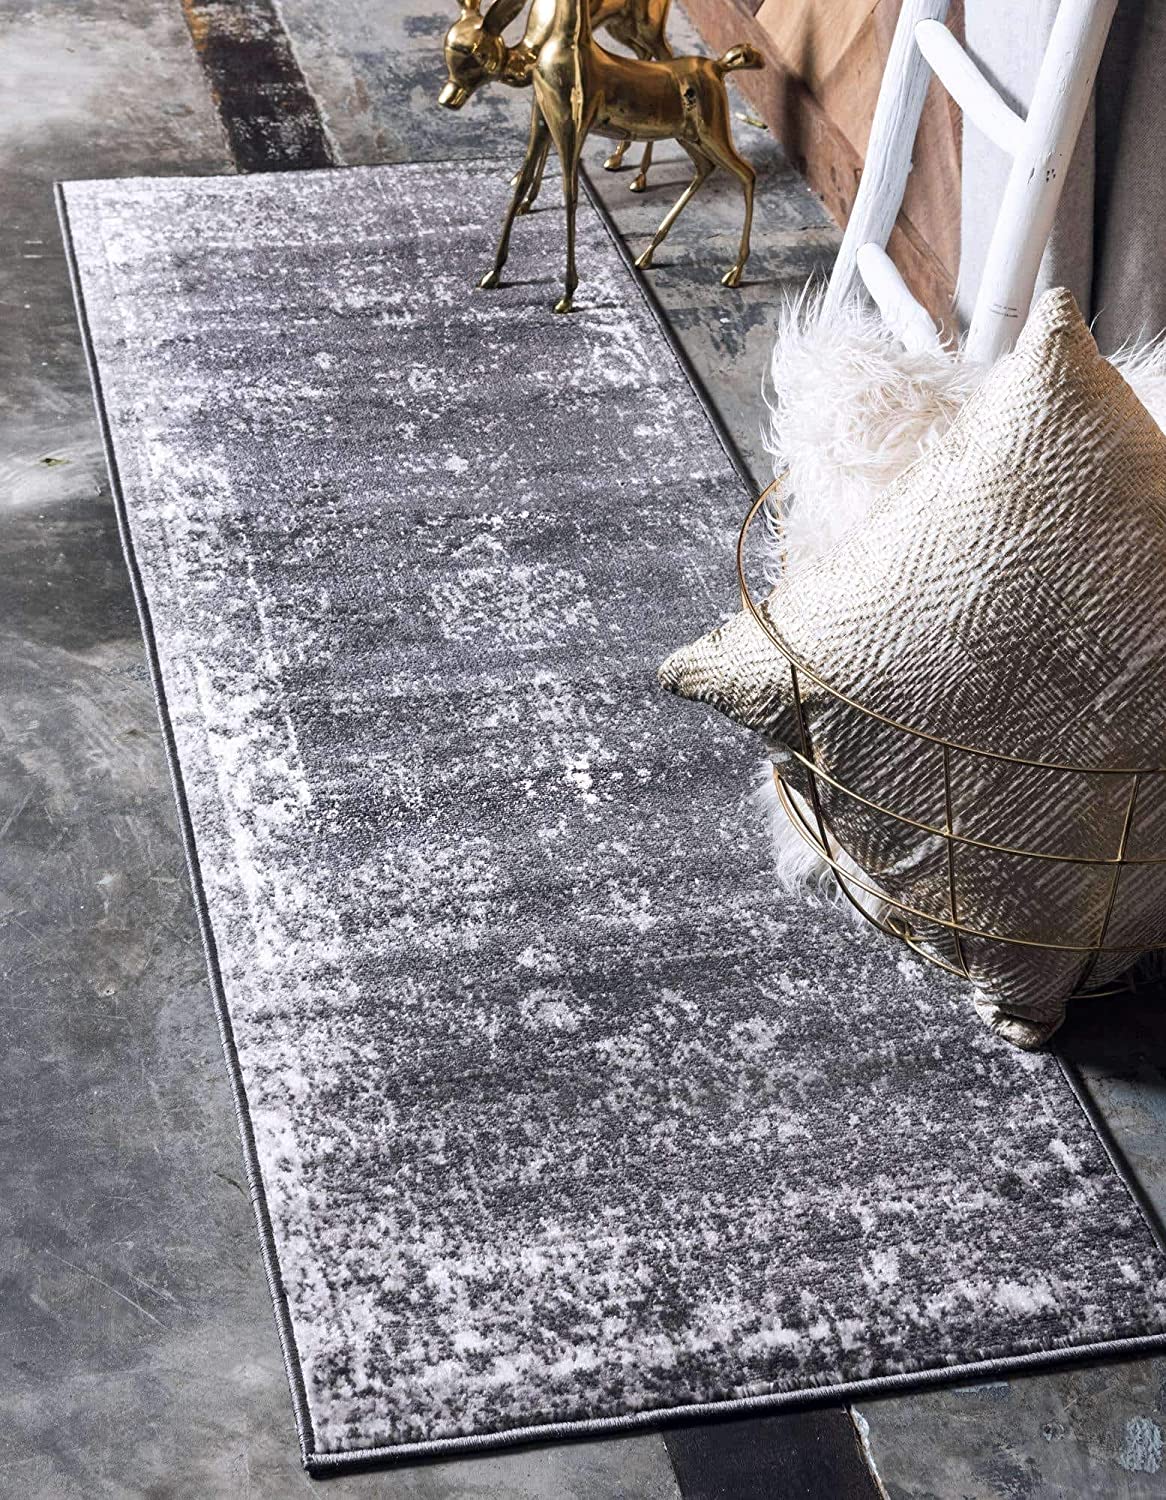 5 Best Choice Of Area Rugs For Hallways [Reviewed in 2020]